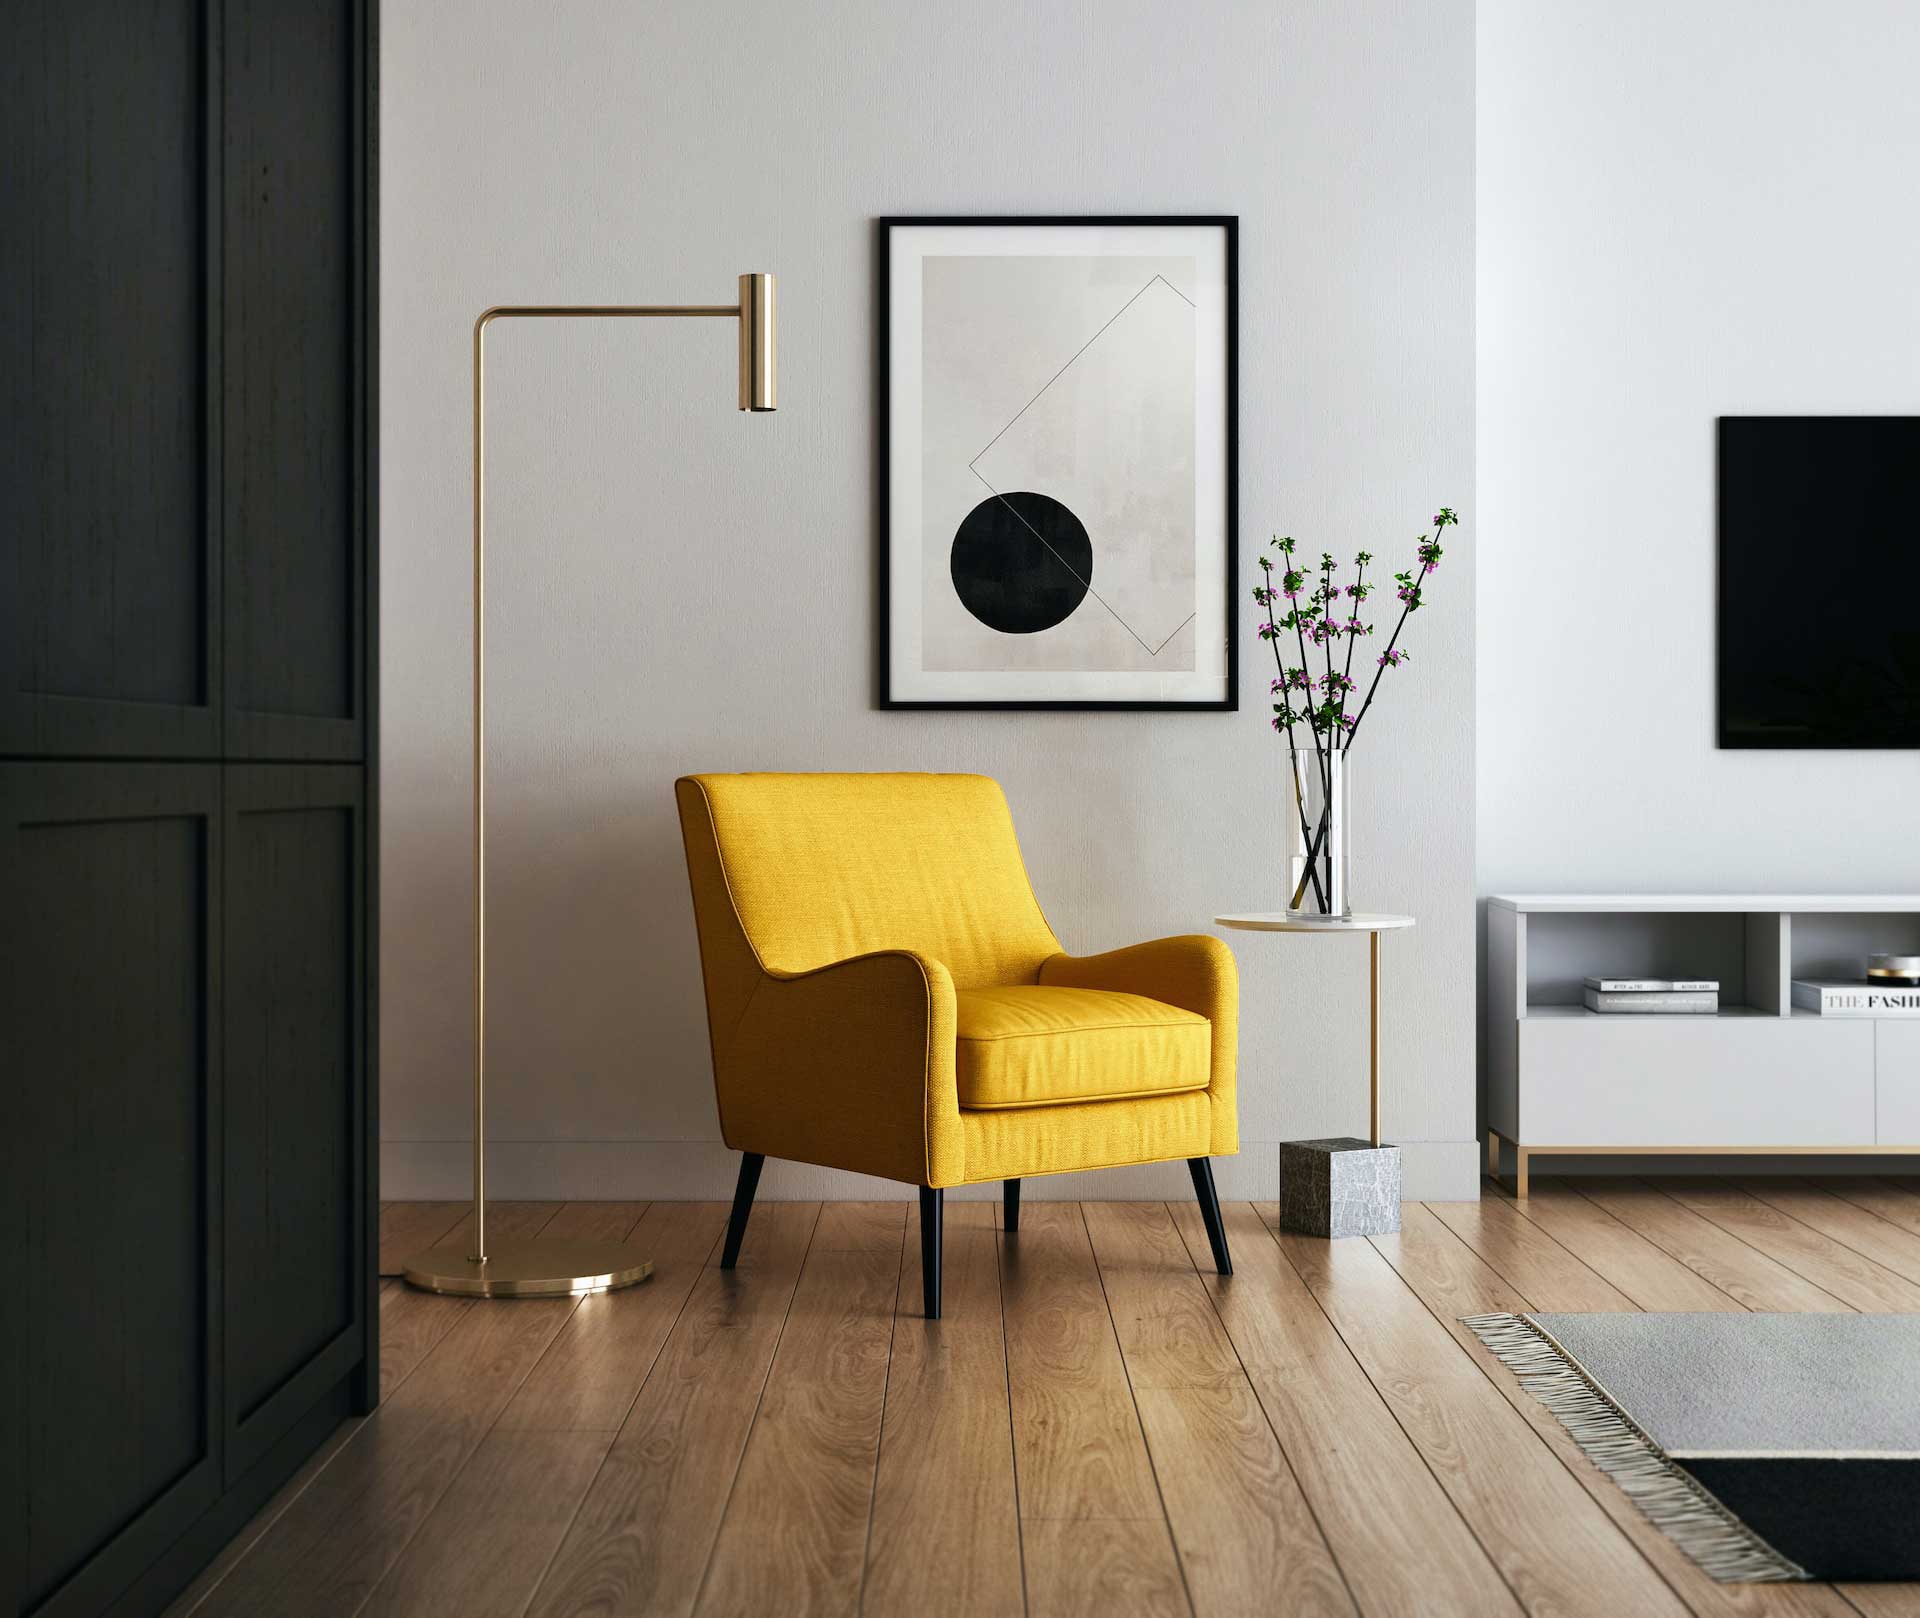 Minimalist interior with yellow armchair, floor lamp, and wall art